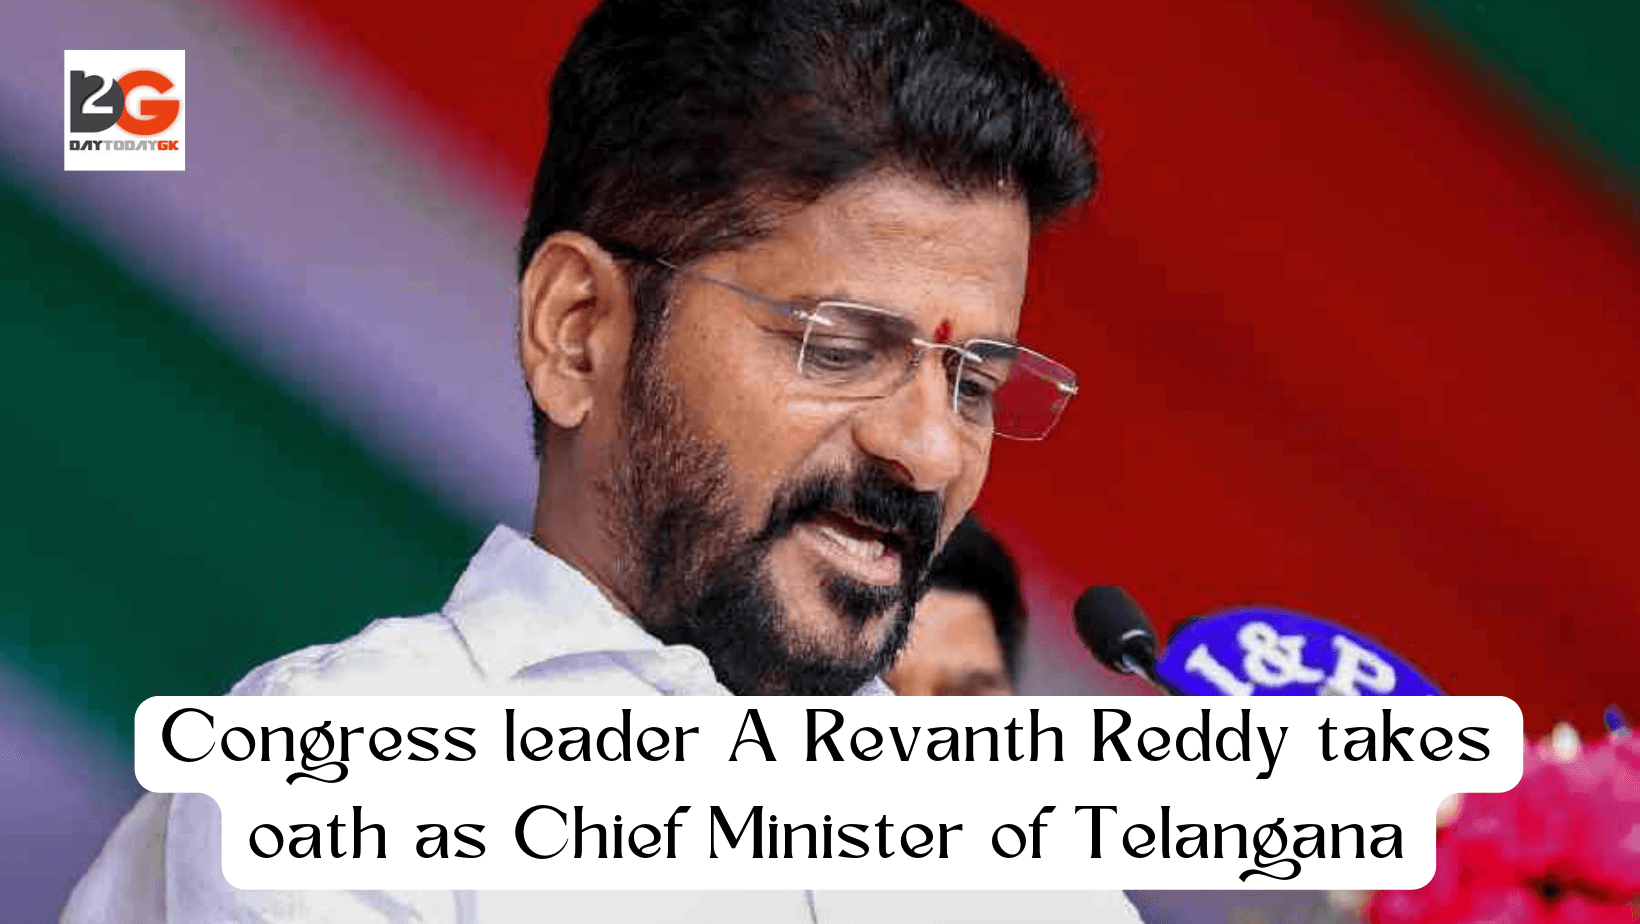 Congress leader A Revanth Reddy takes oath as Chief Minister of Telangana